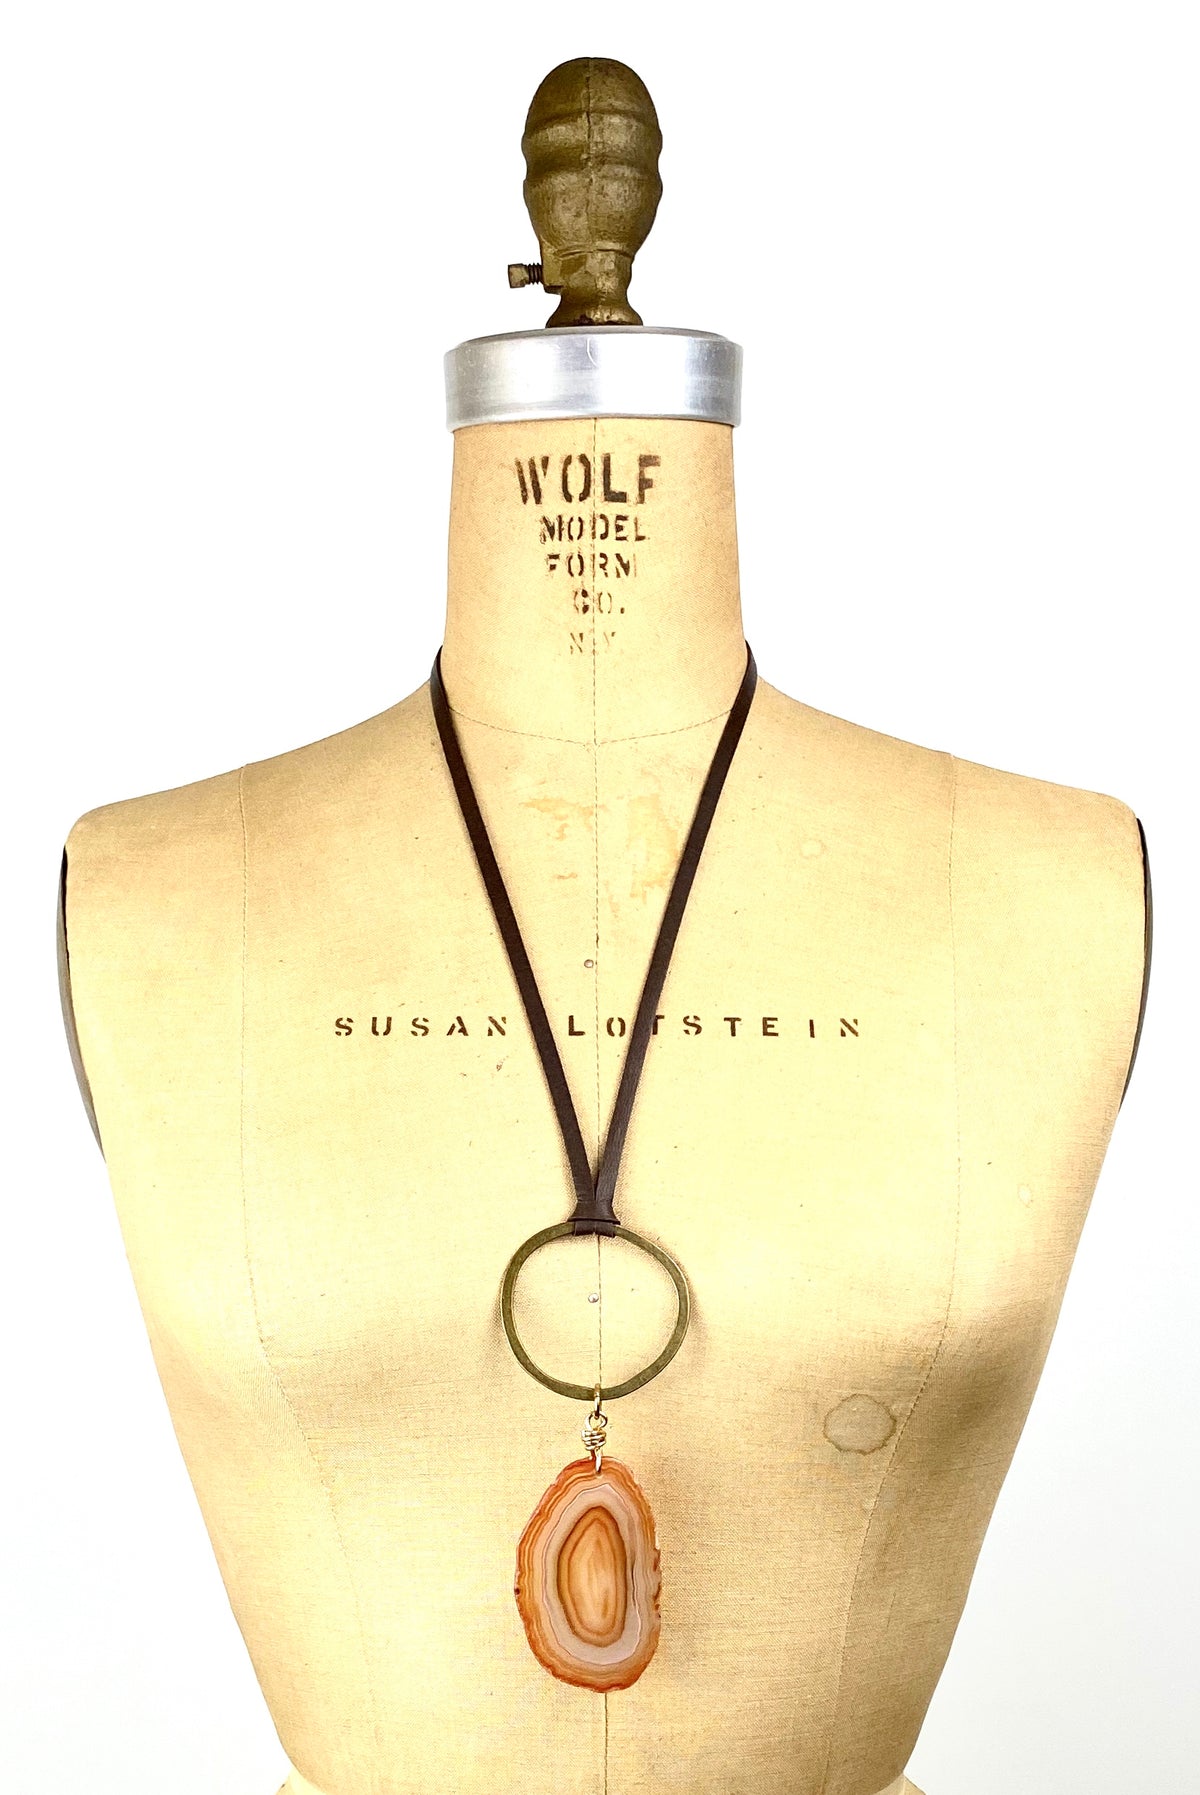 Agate Slice - Bronze Circle Leather Necklace